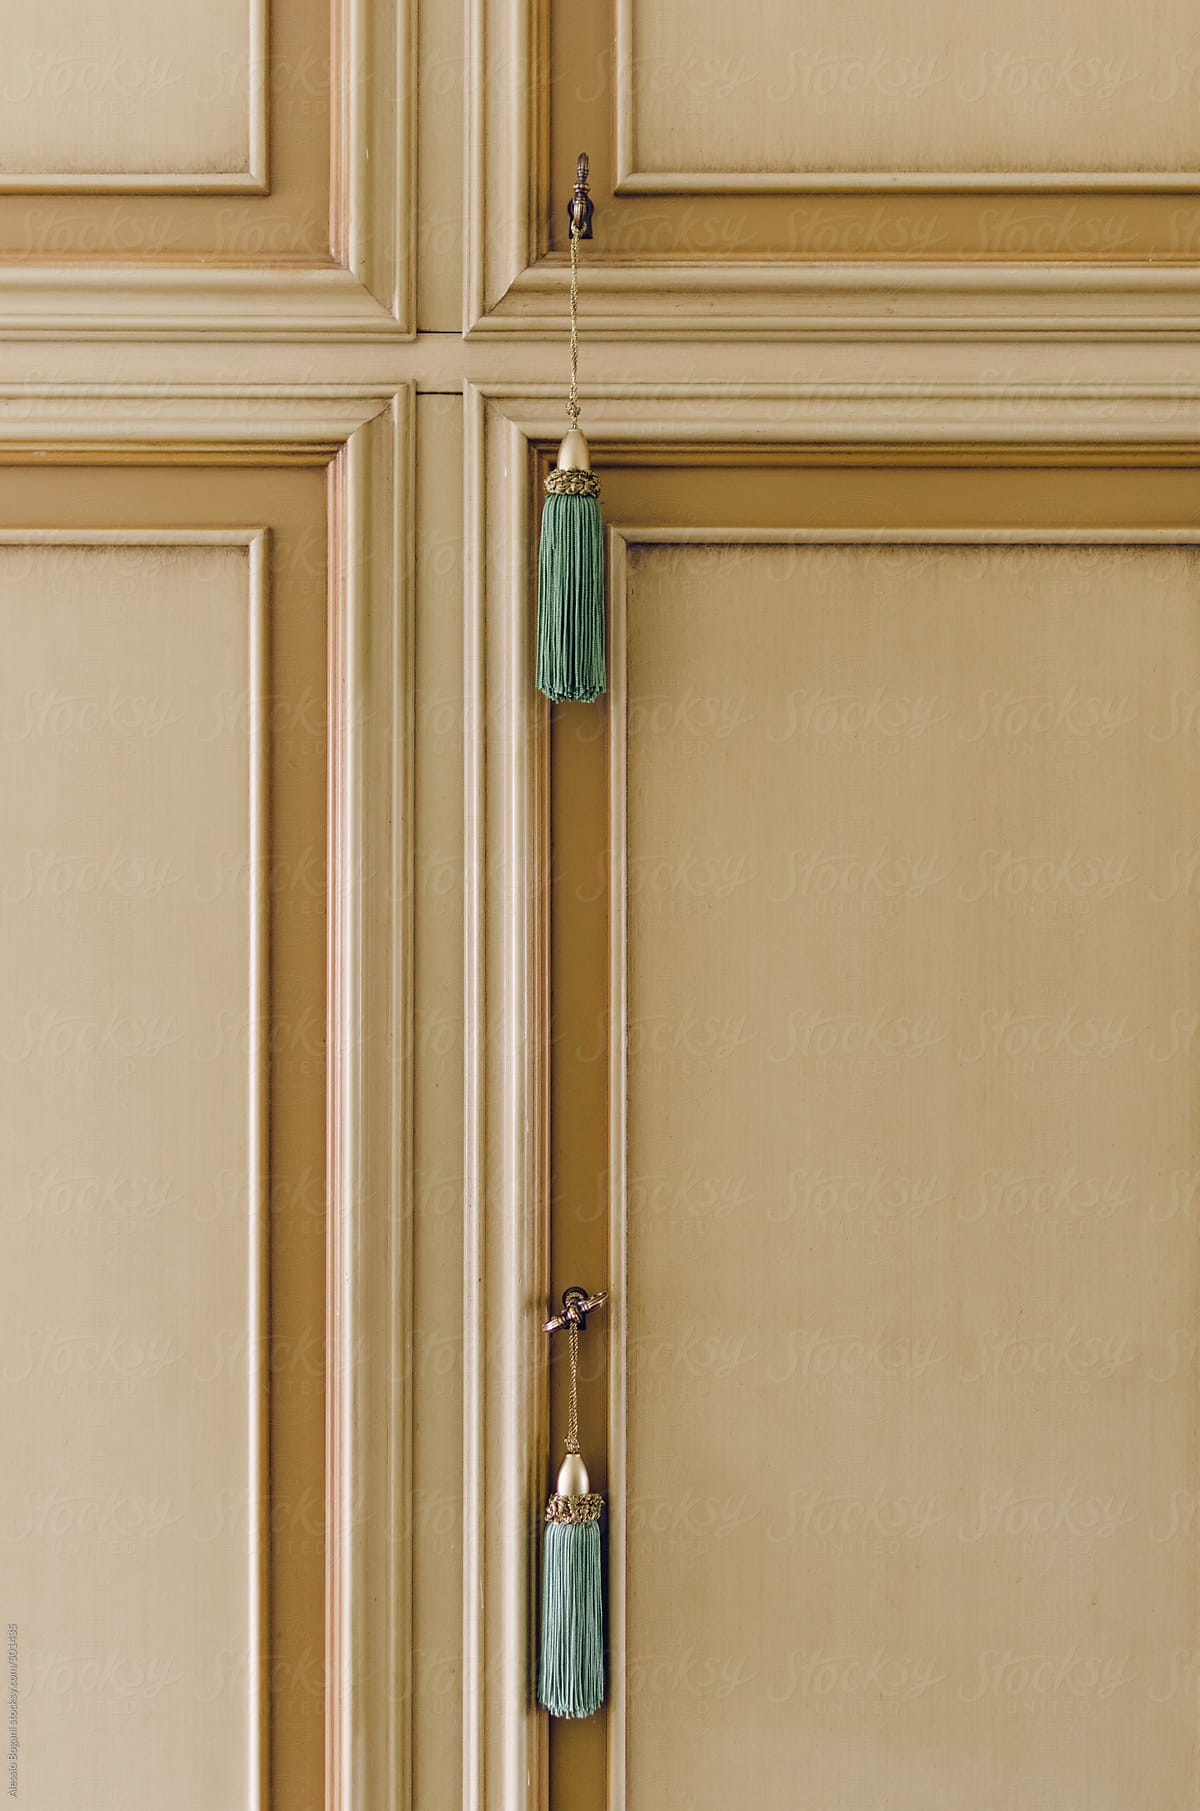 Closed cabinet doors with keys and tassels